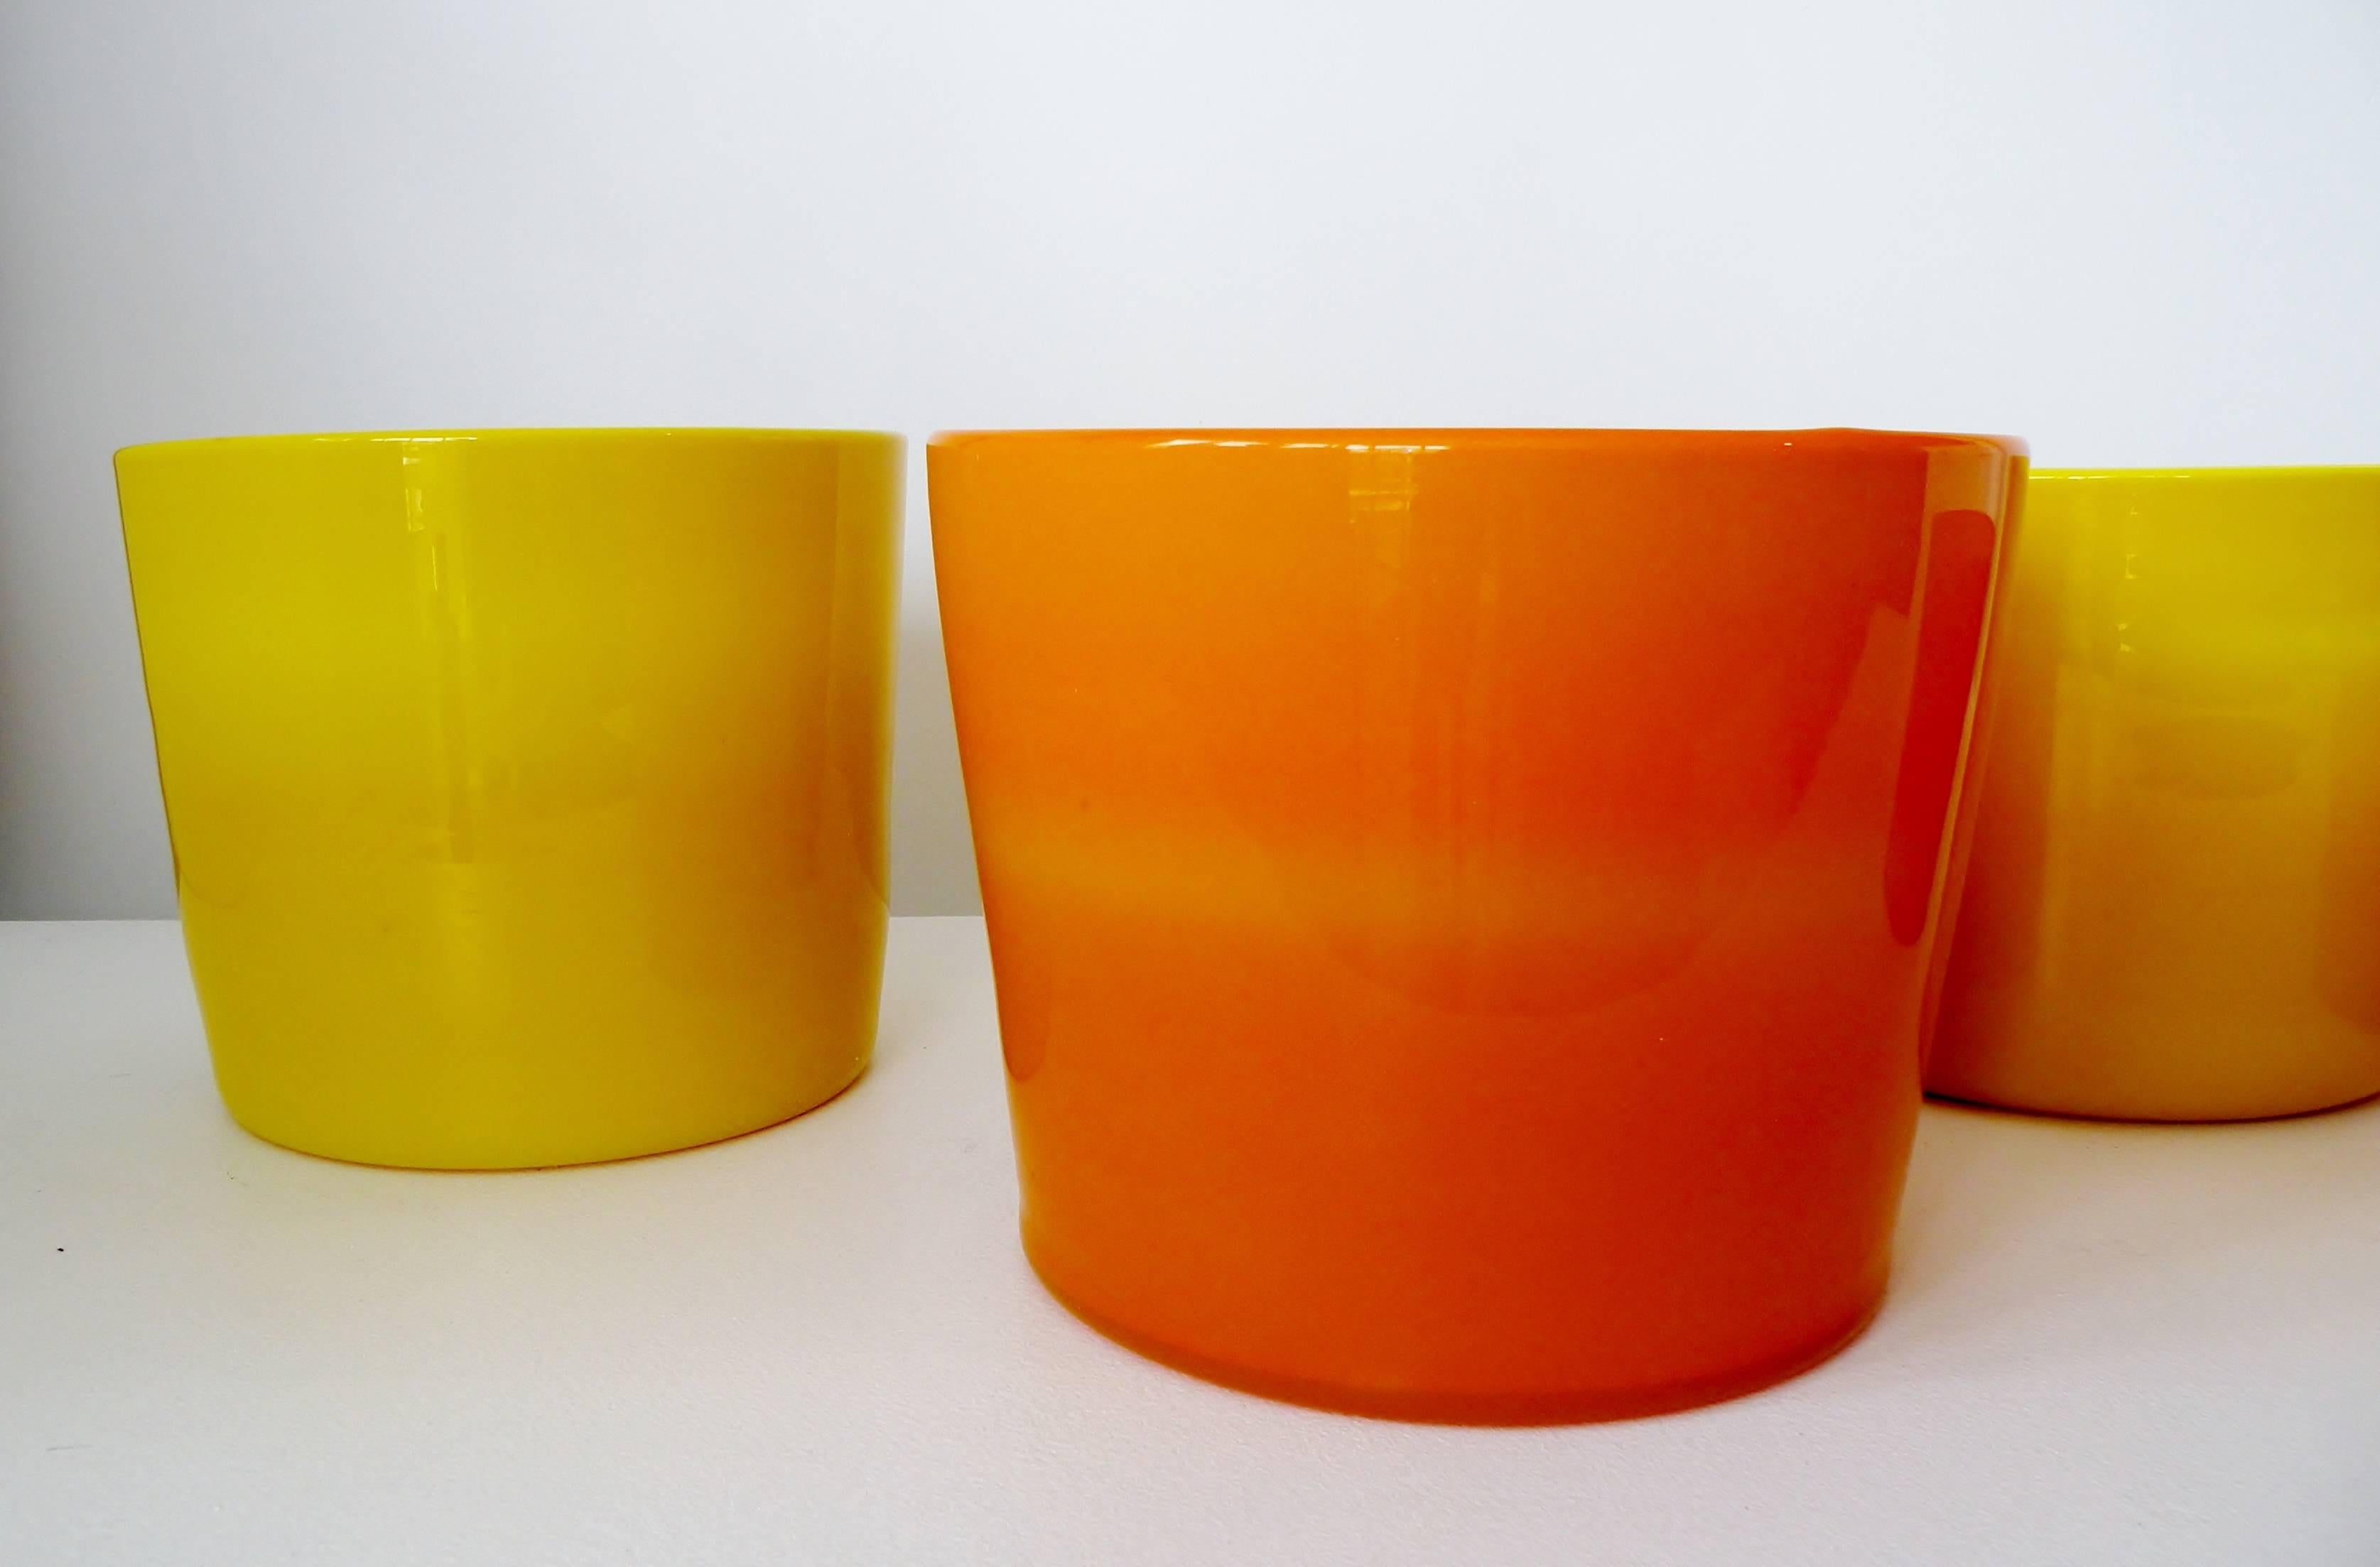 A collection of four art glass vases or planters designed by Erik Hoglund in the 1960s for Boda Glassworks Sweden. 

Orange pair approximate:
small 6.5